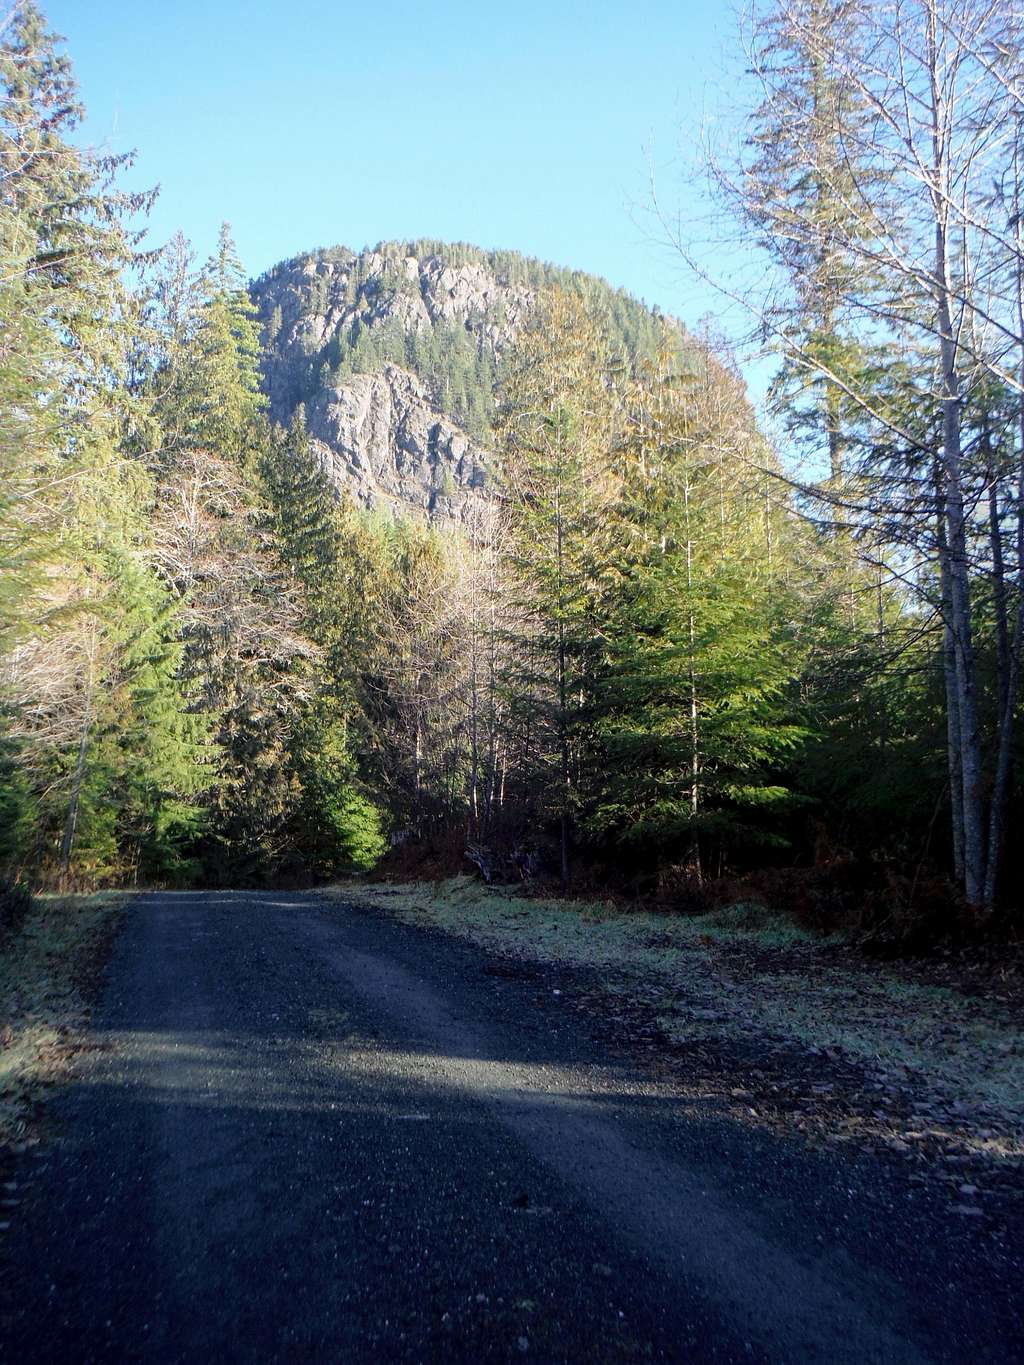 Bald Mountain from the road